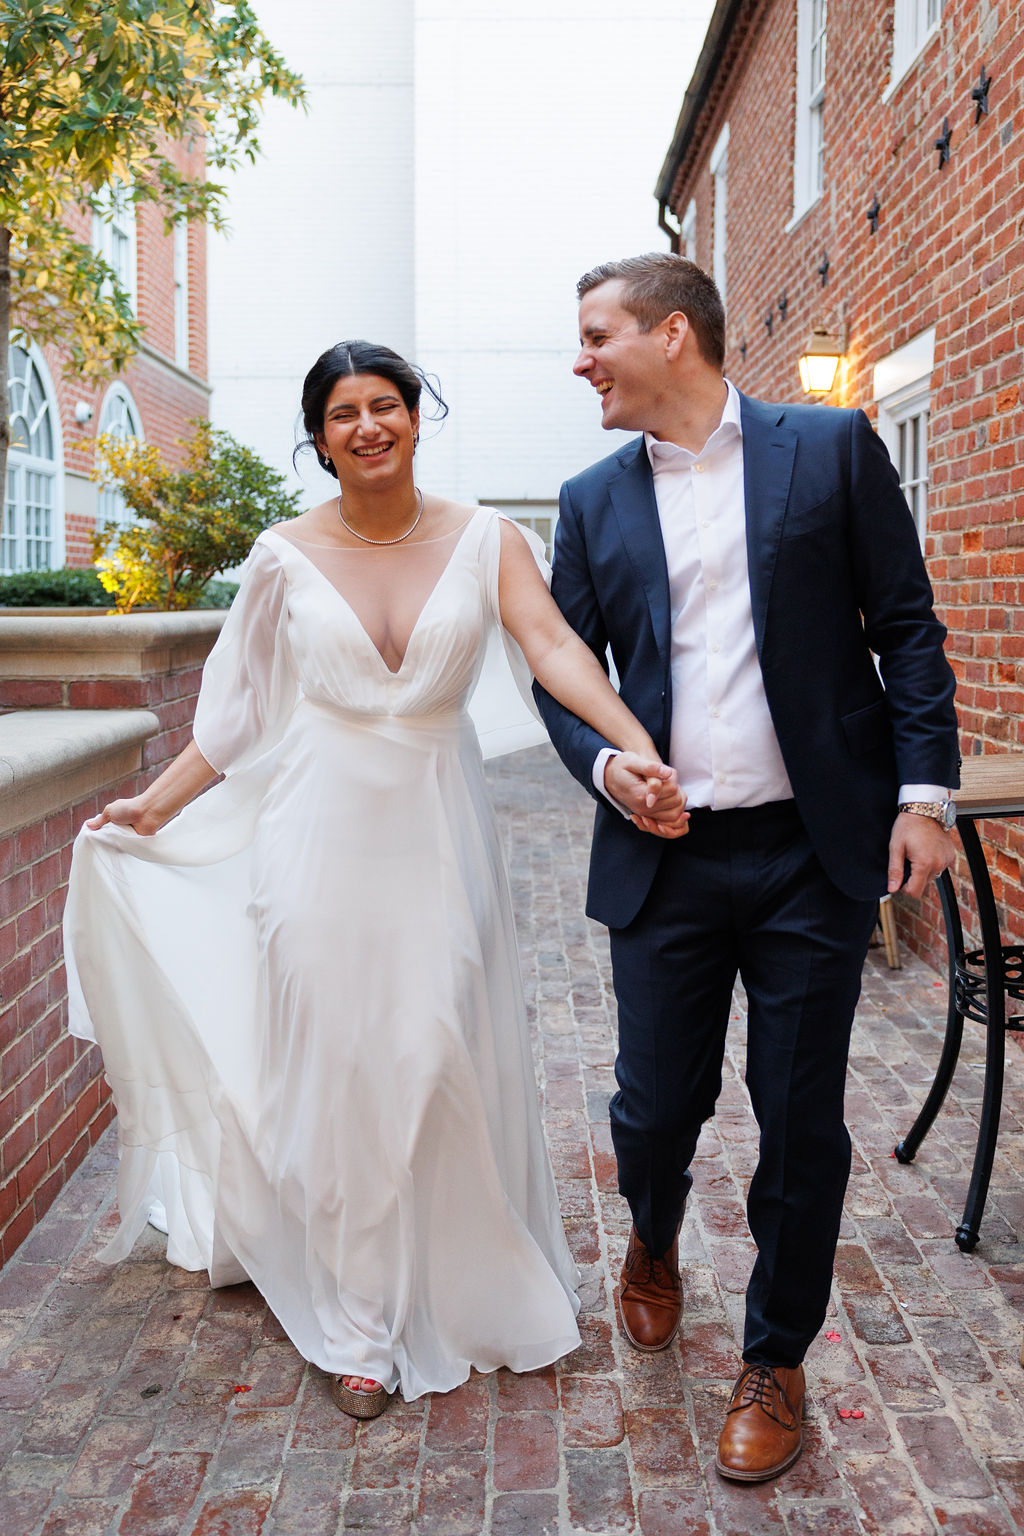 Newlyweds laugh and hold hands while walking in an alley